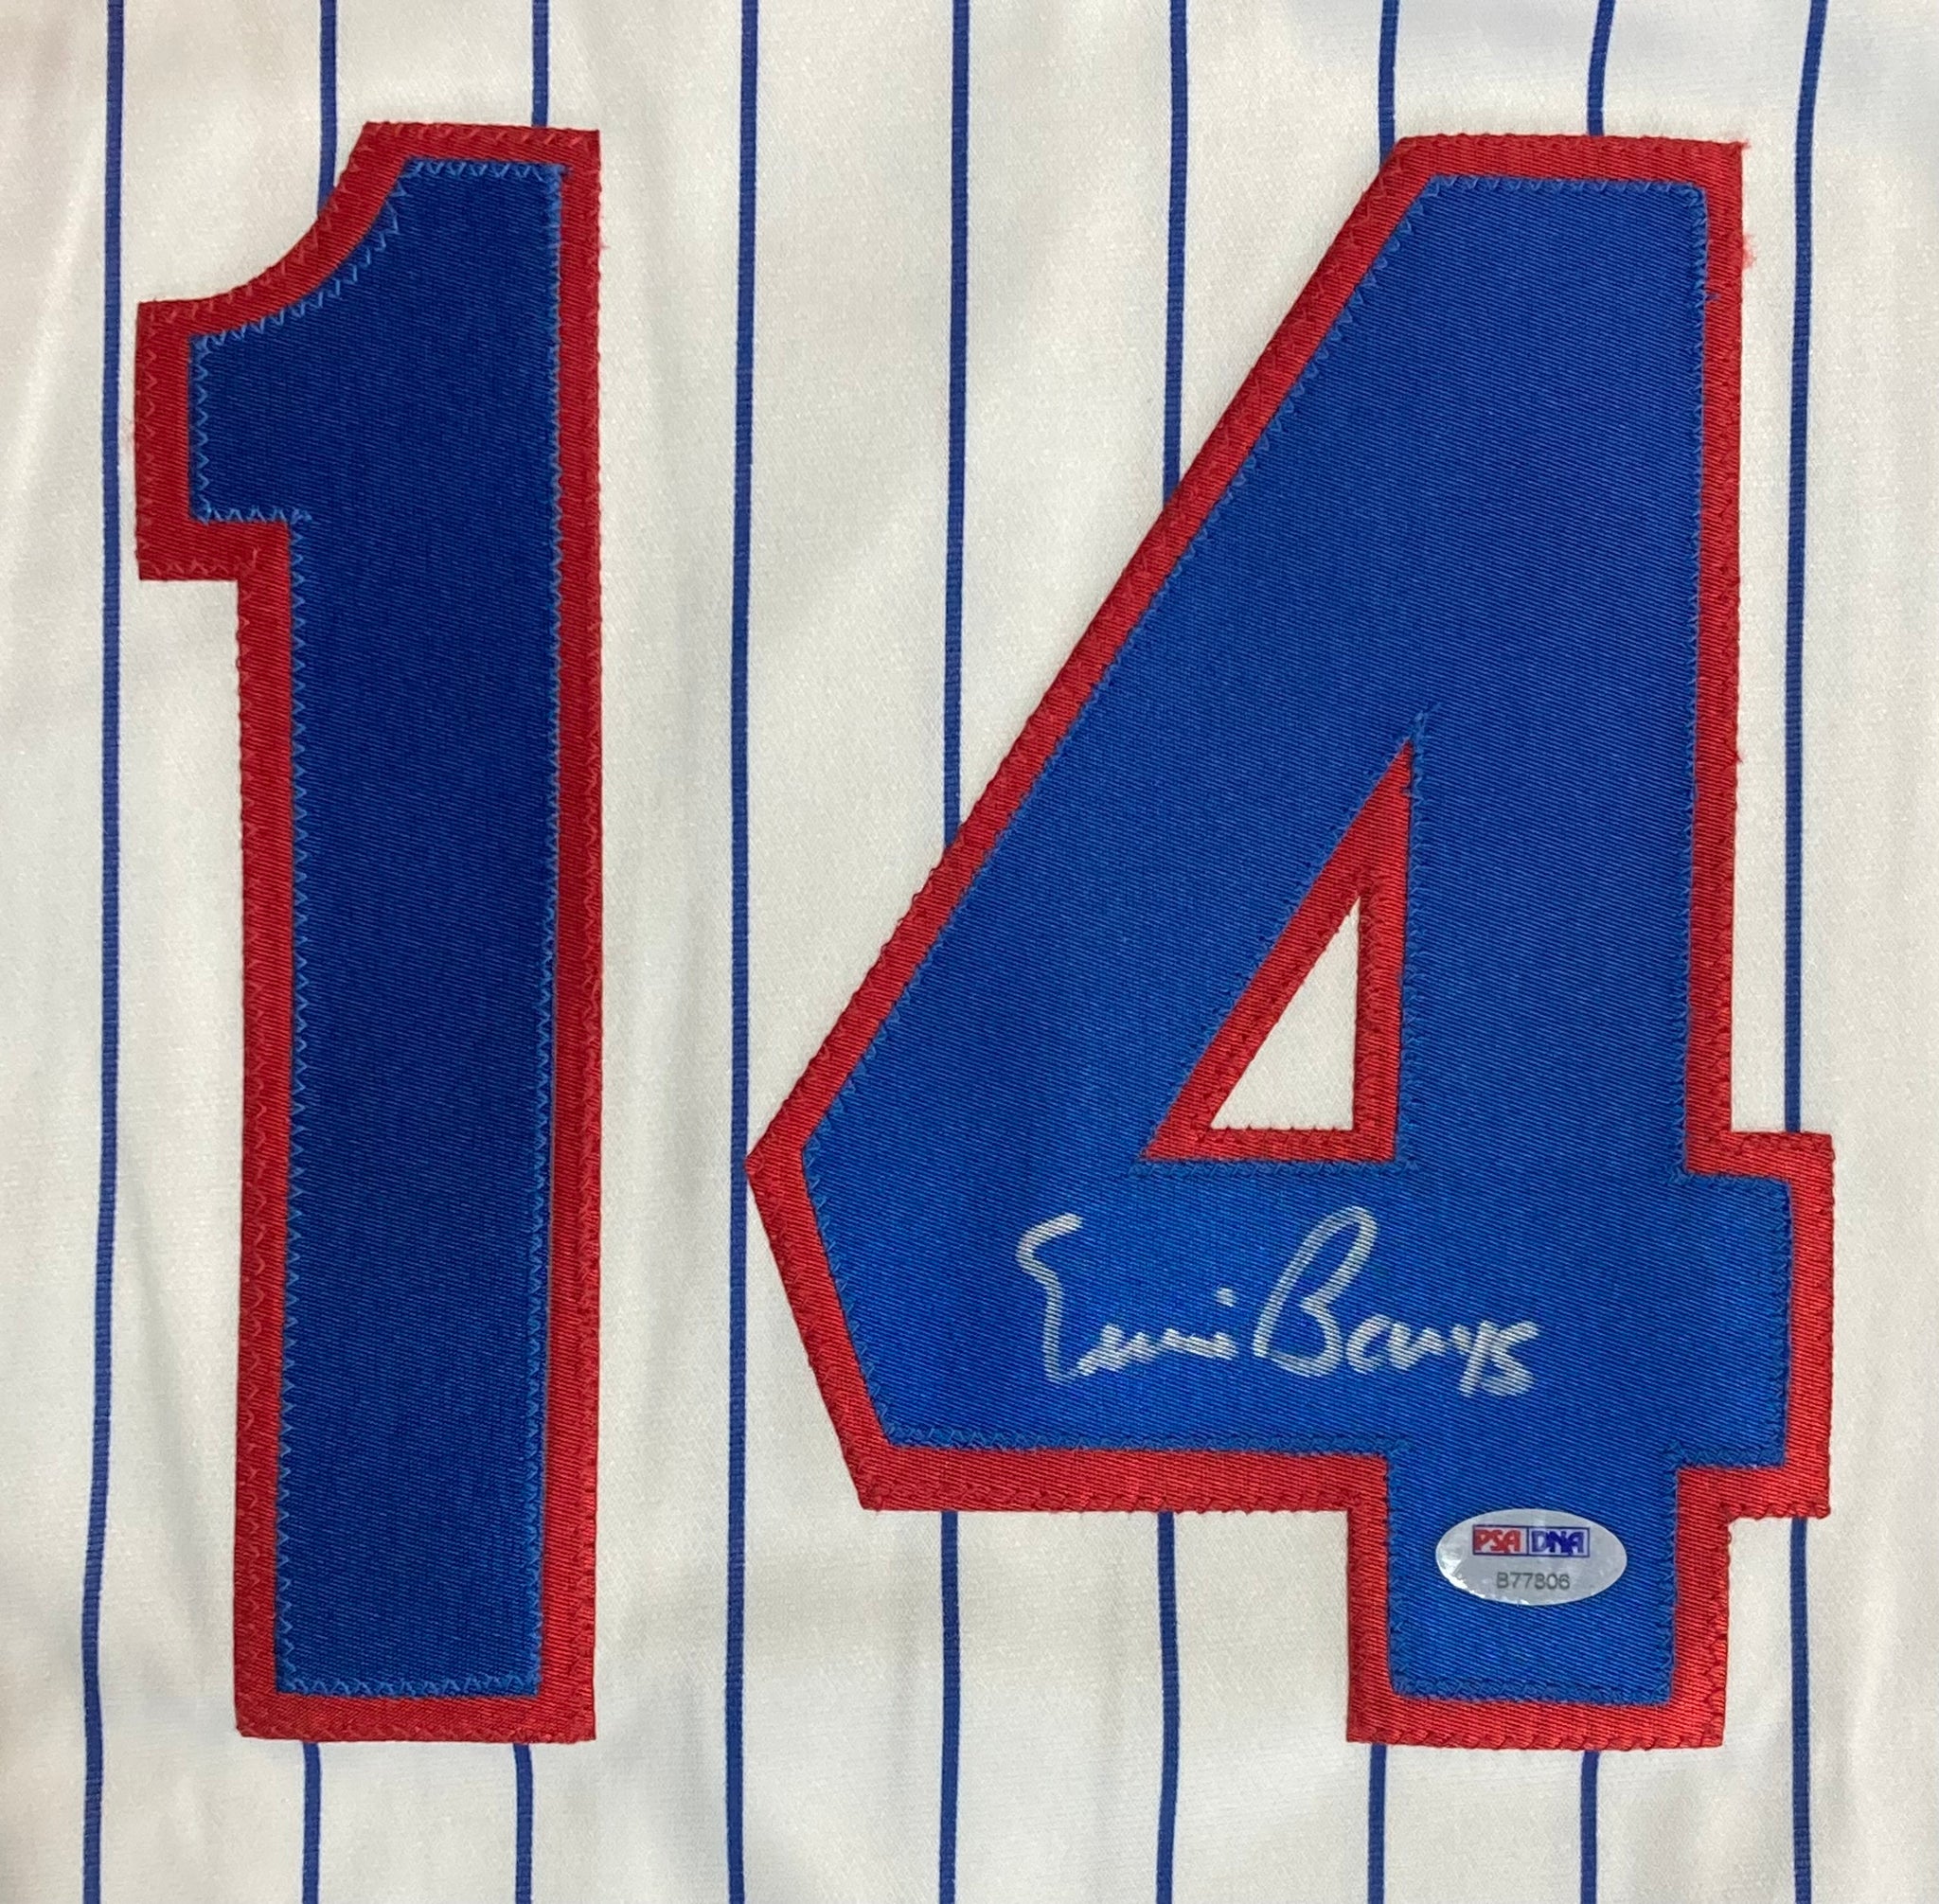 Ernie Banks Autographed Chicago Cubs (White #14) Jersey – PSADNA